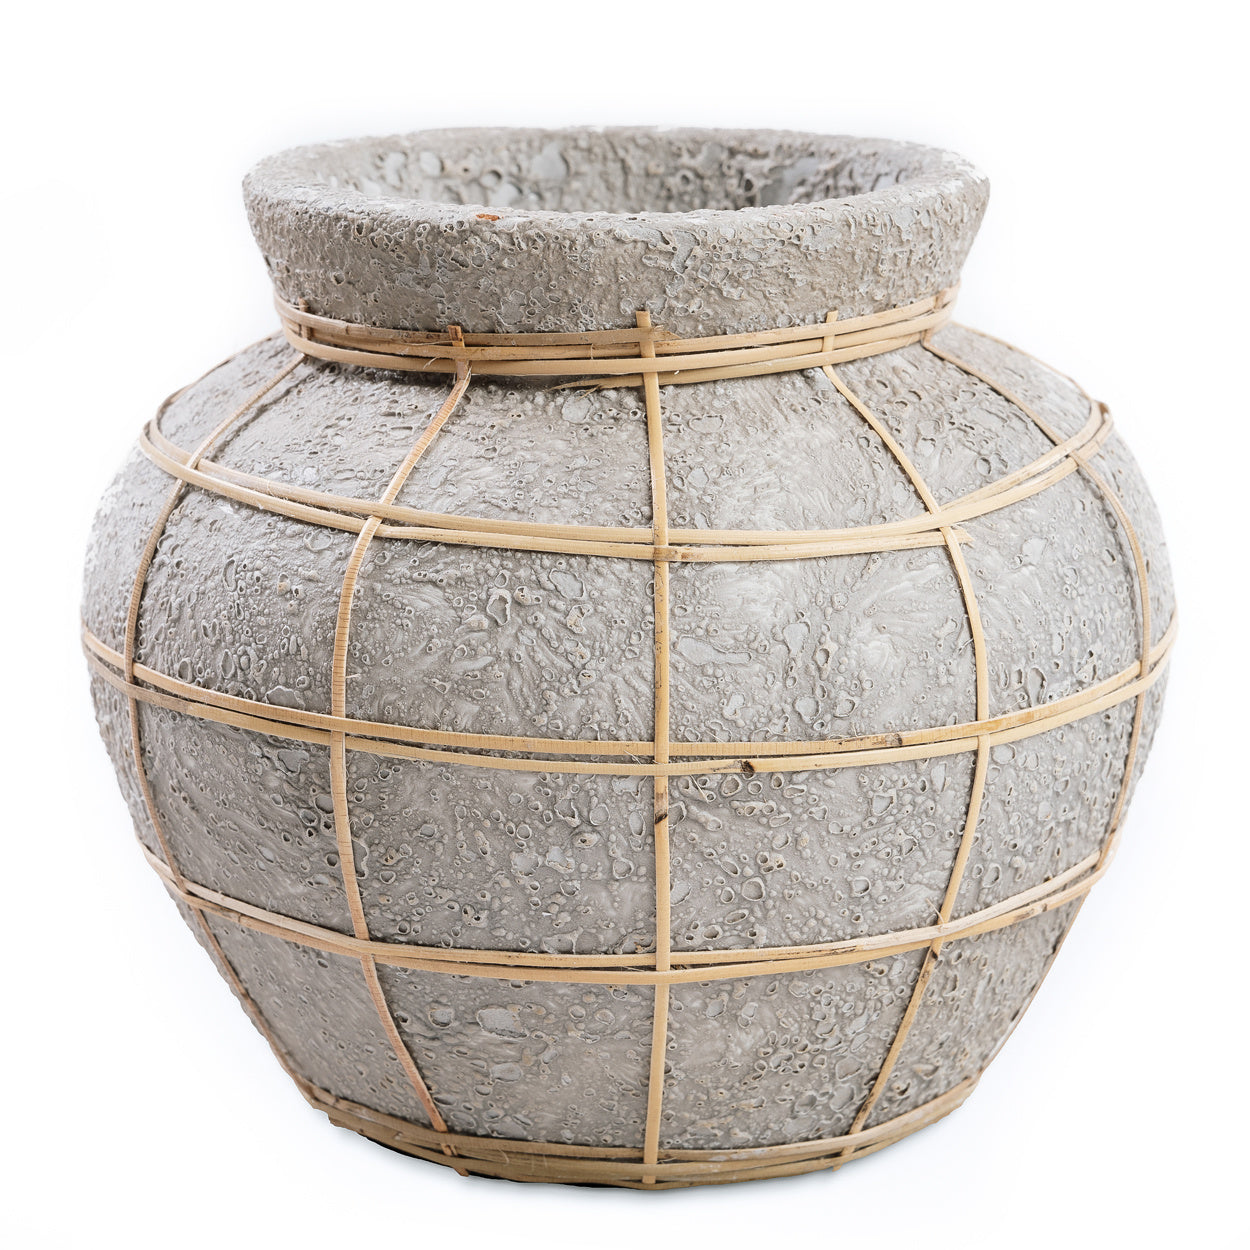 THE BELLY Vase - Concrete Natural M